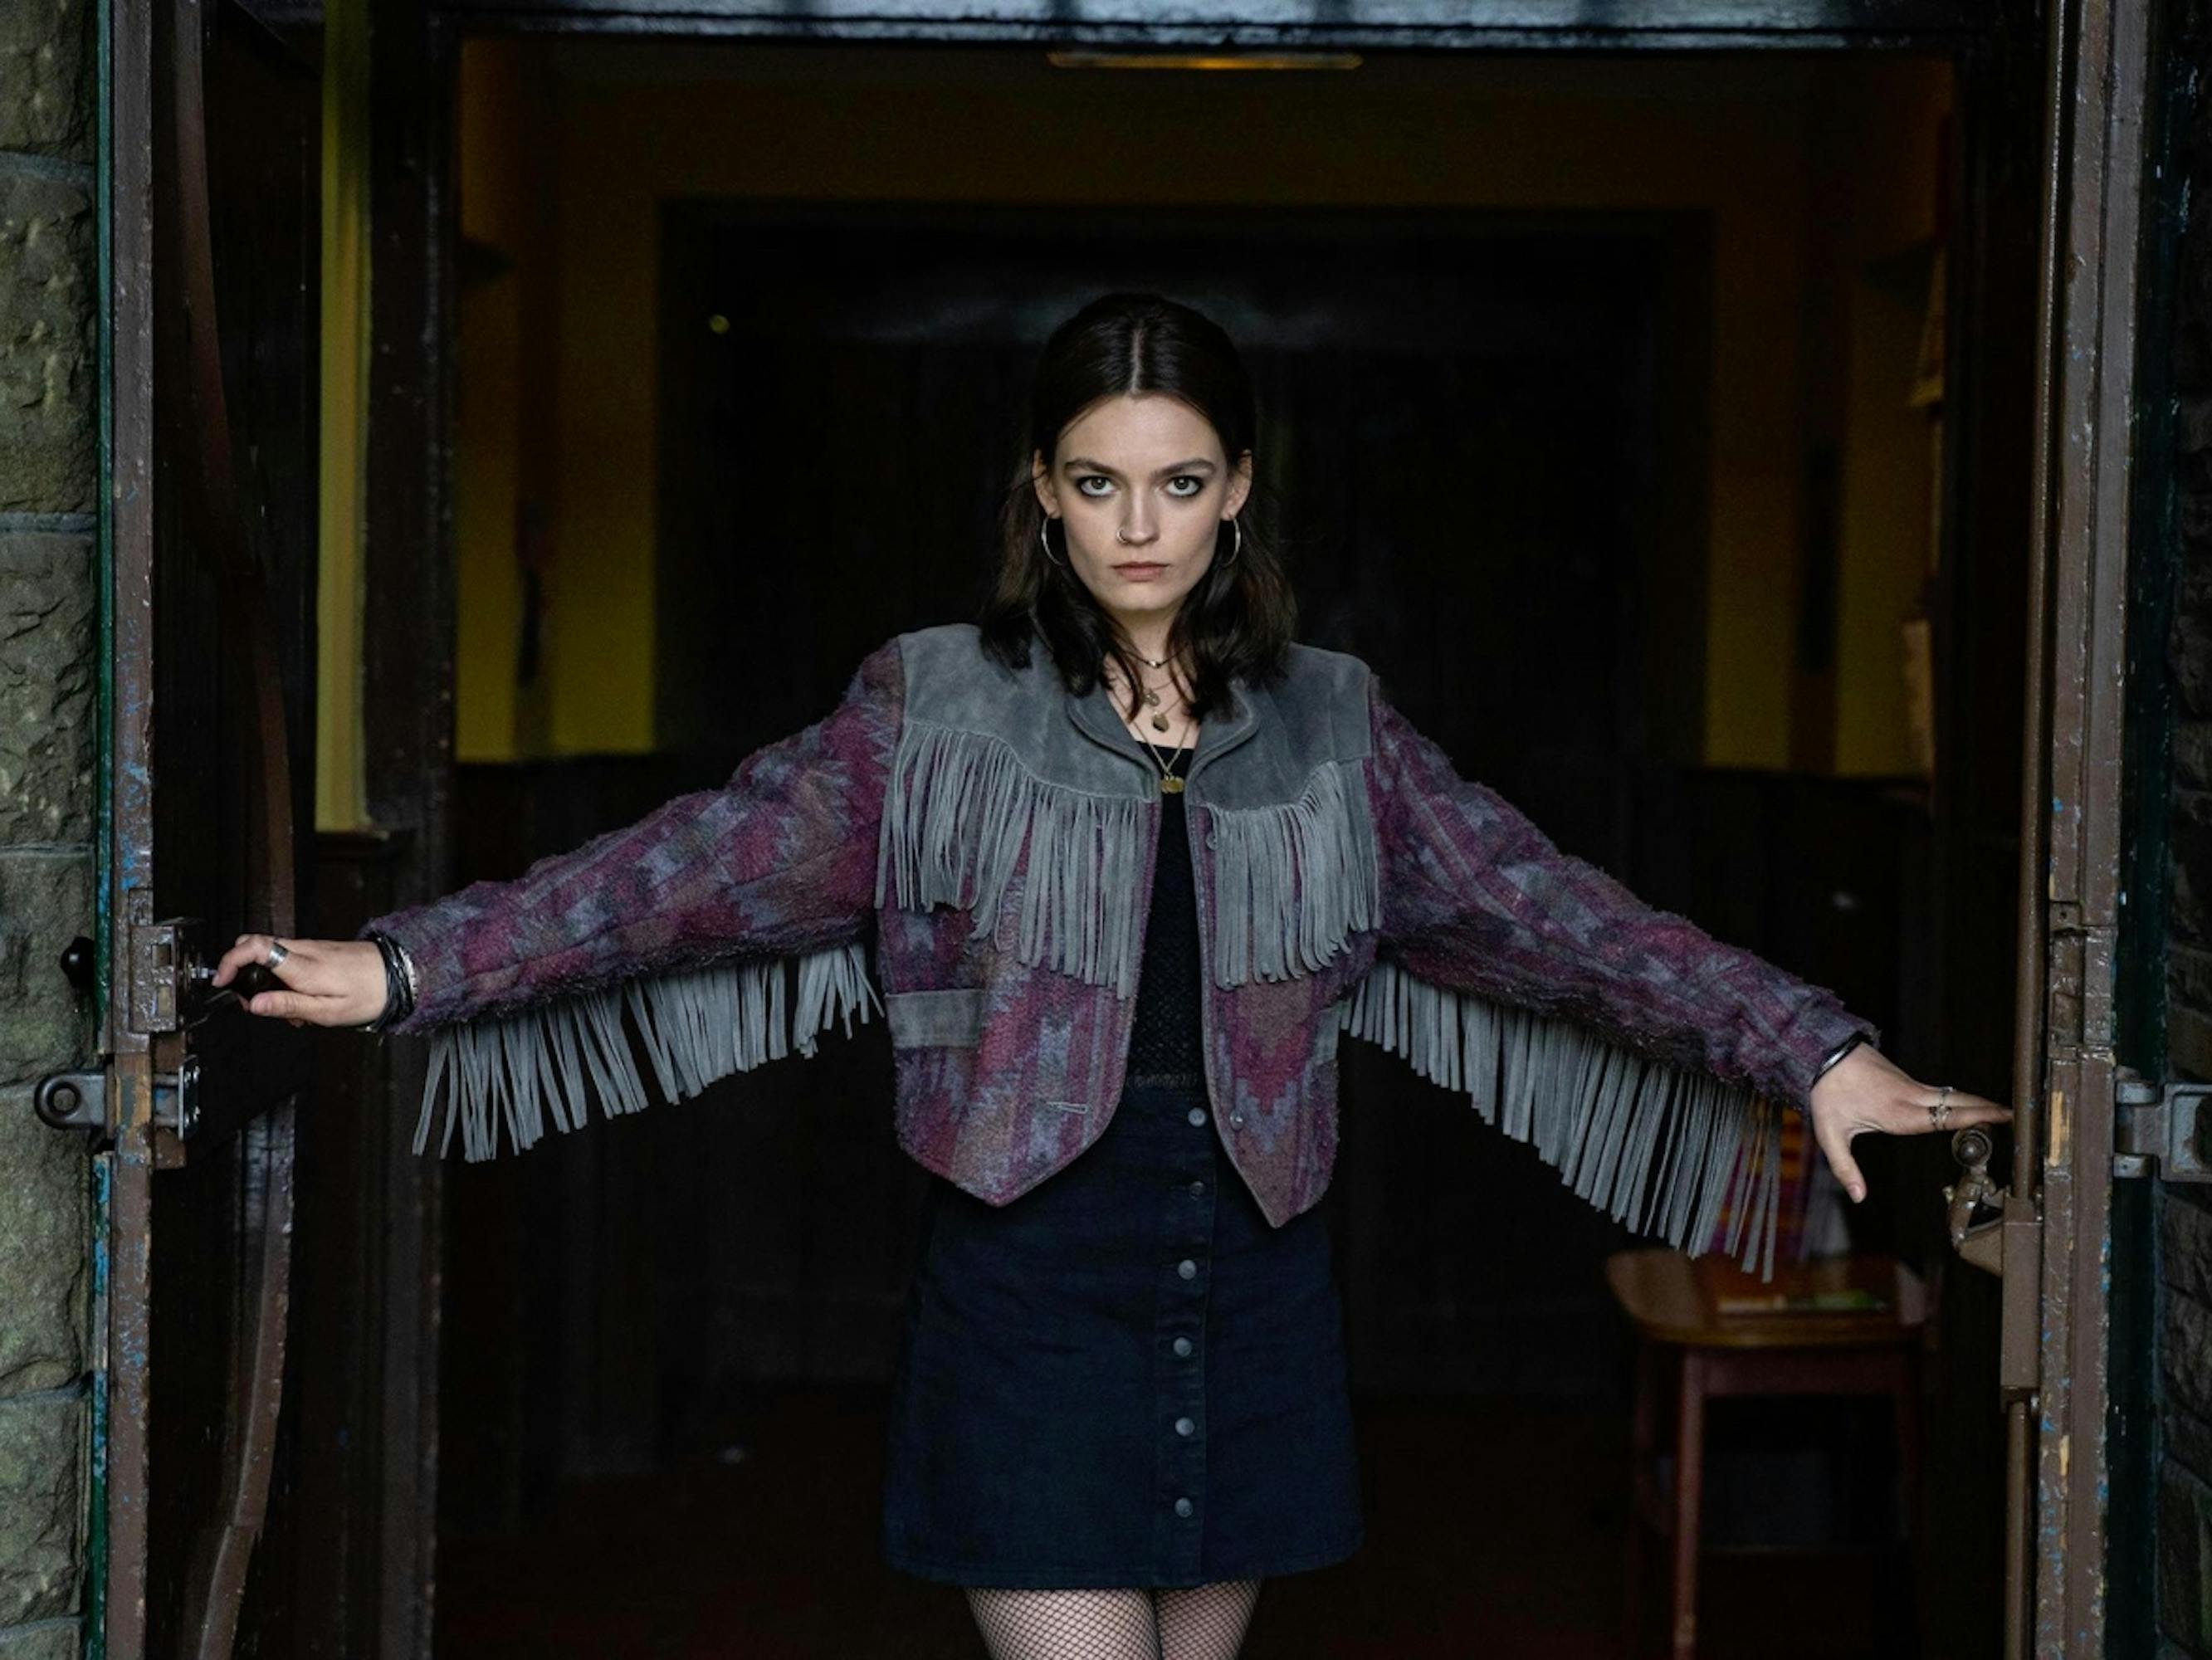 Maeve Wiley (Emma Mackey) wears a dark skirt, fringe coat, and tights as she opens the doors with an ominous expression on her face.